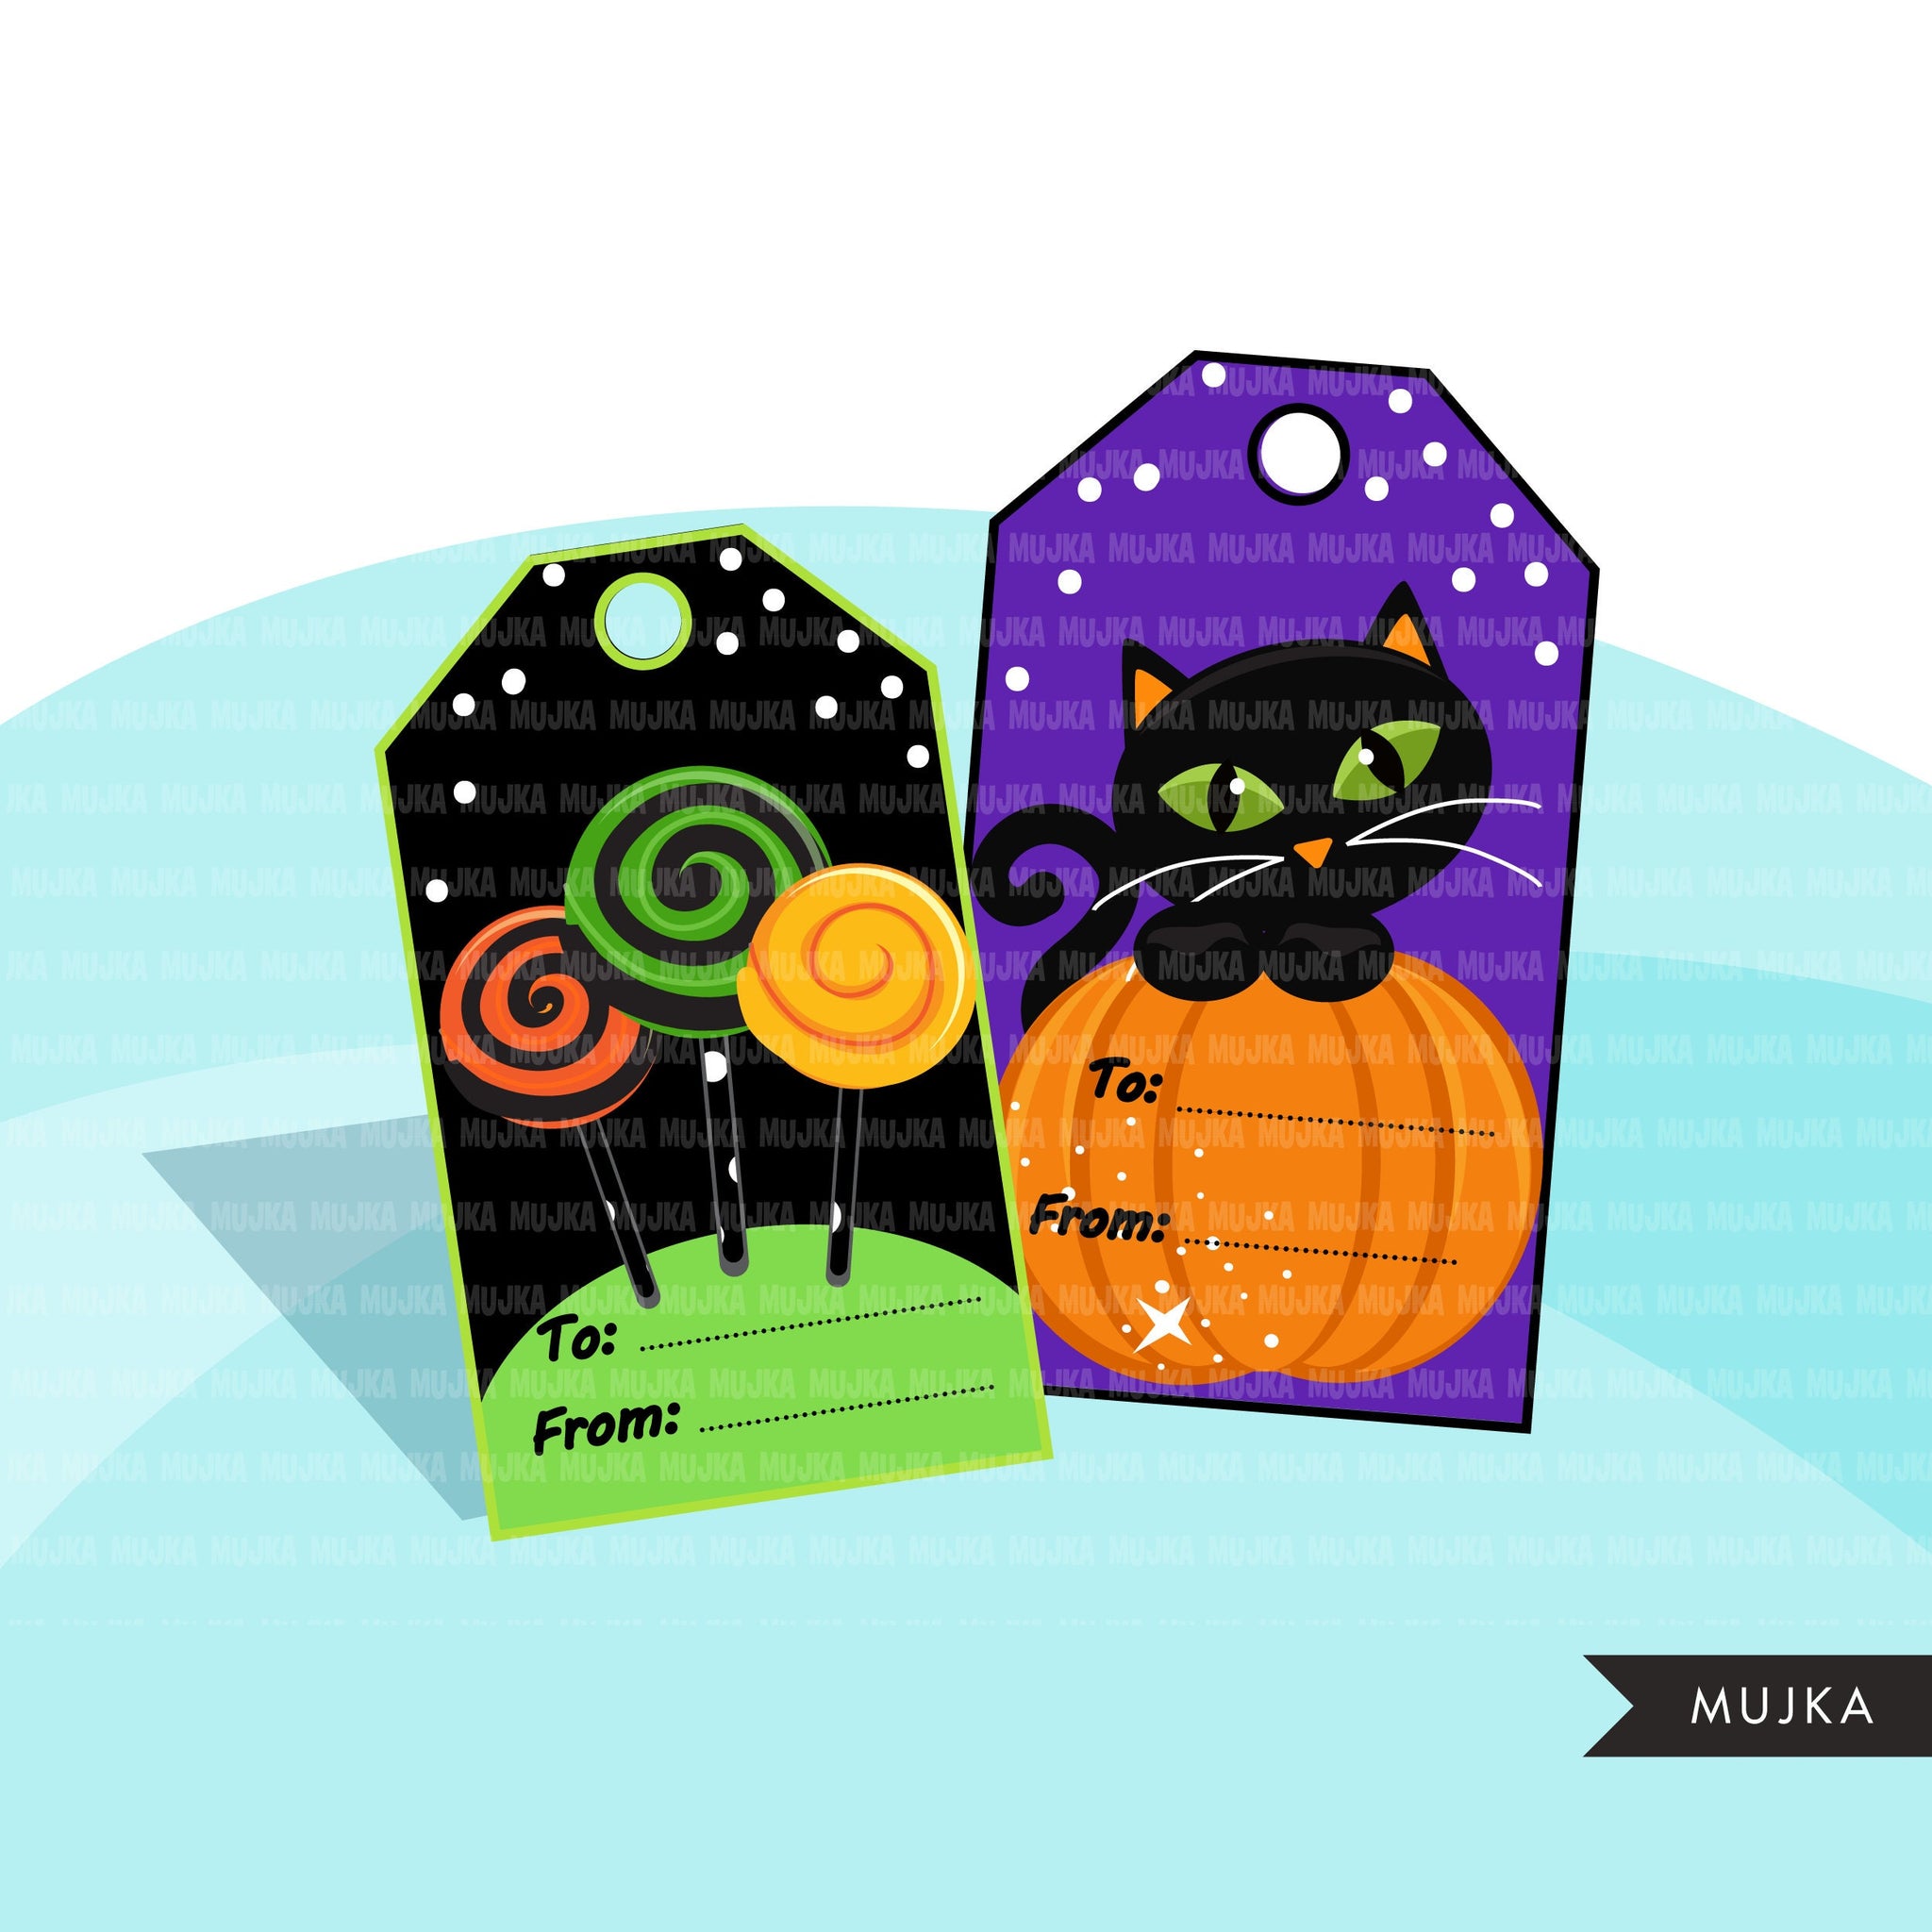 Halloween gift tags, pumpkin digital stickers, Ripper stickers, Halloween png, Halloween stickers, sugar skull tags, witch tags